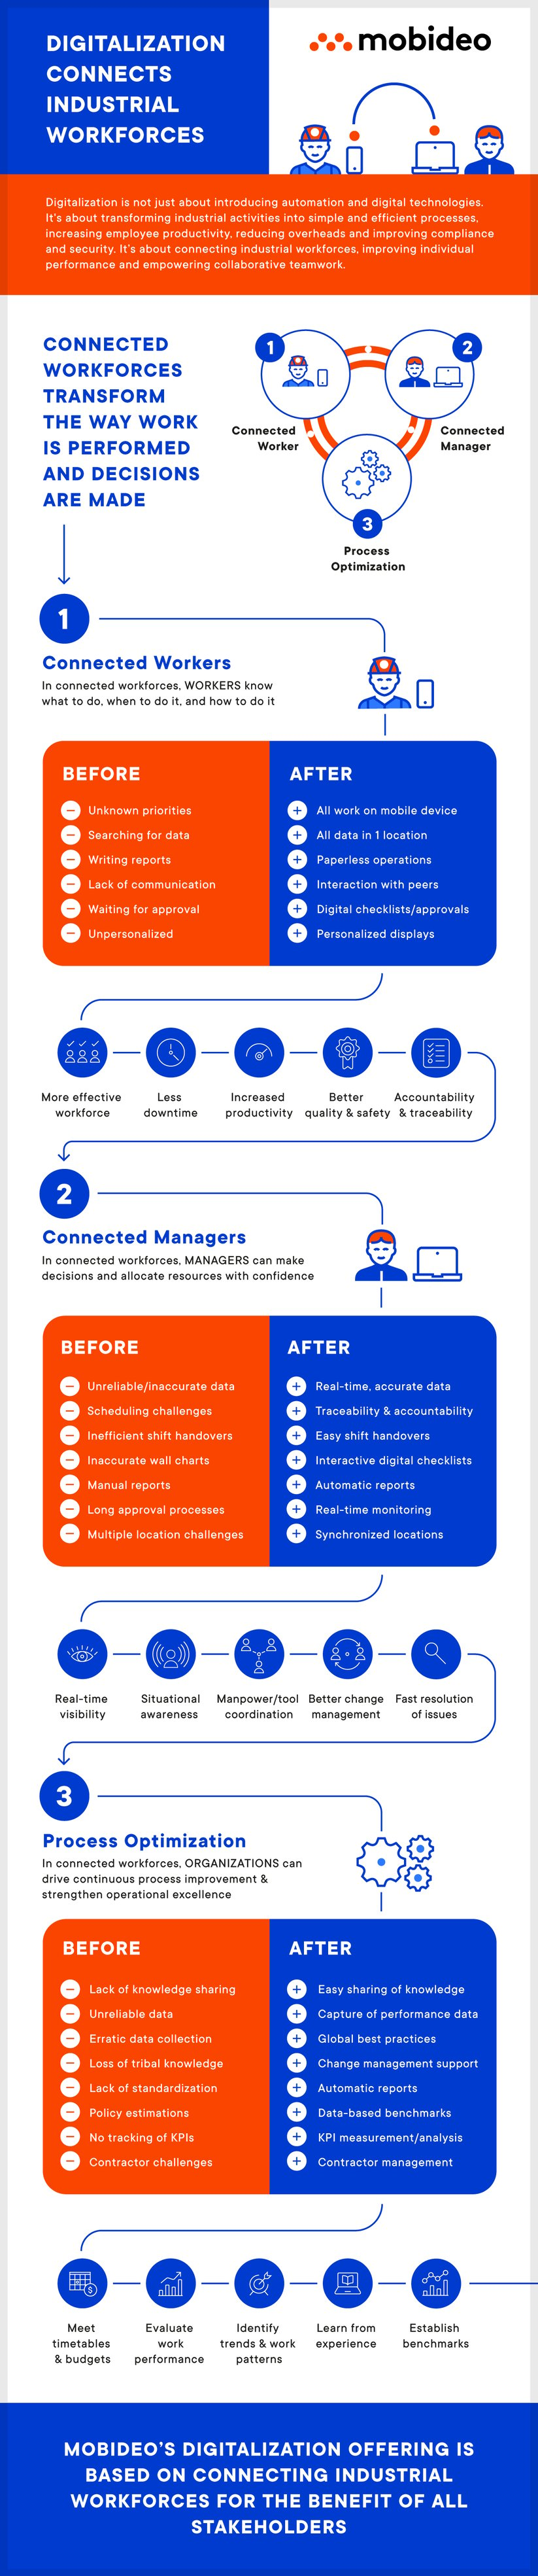 Blog_Connected Workforce Infographic-1